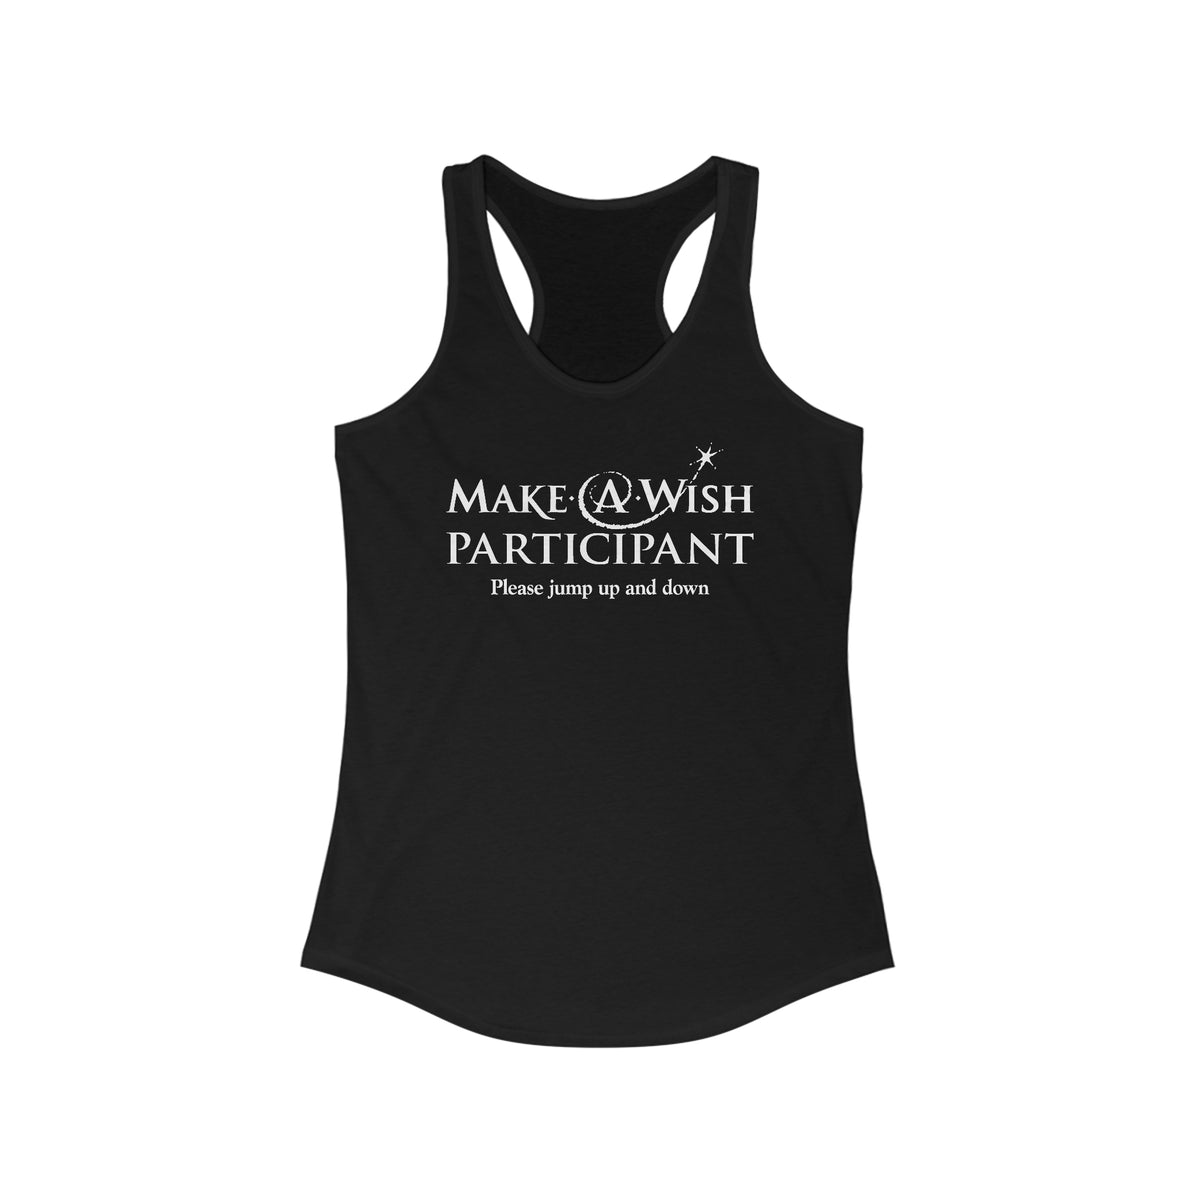 Make A Wish Participant Please Jump Up And Down  - Women’s Racerback Tank